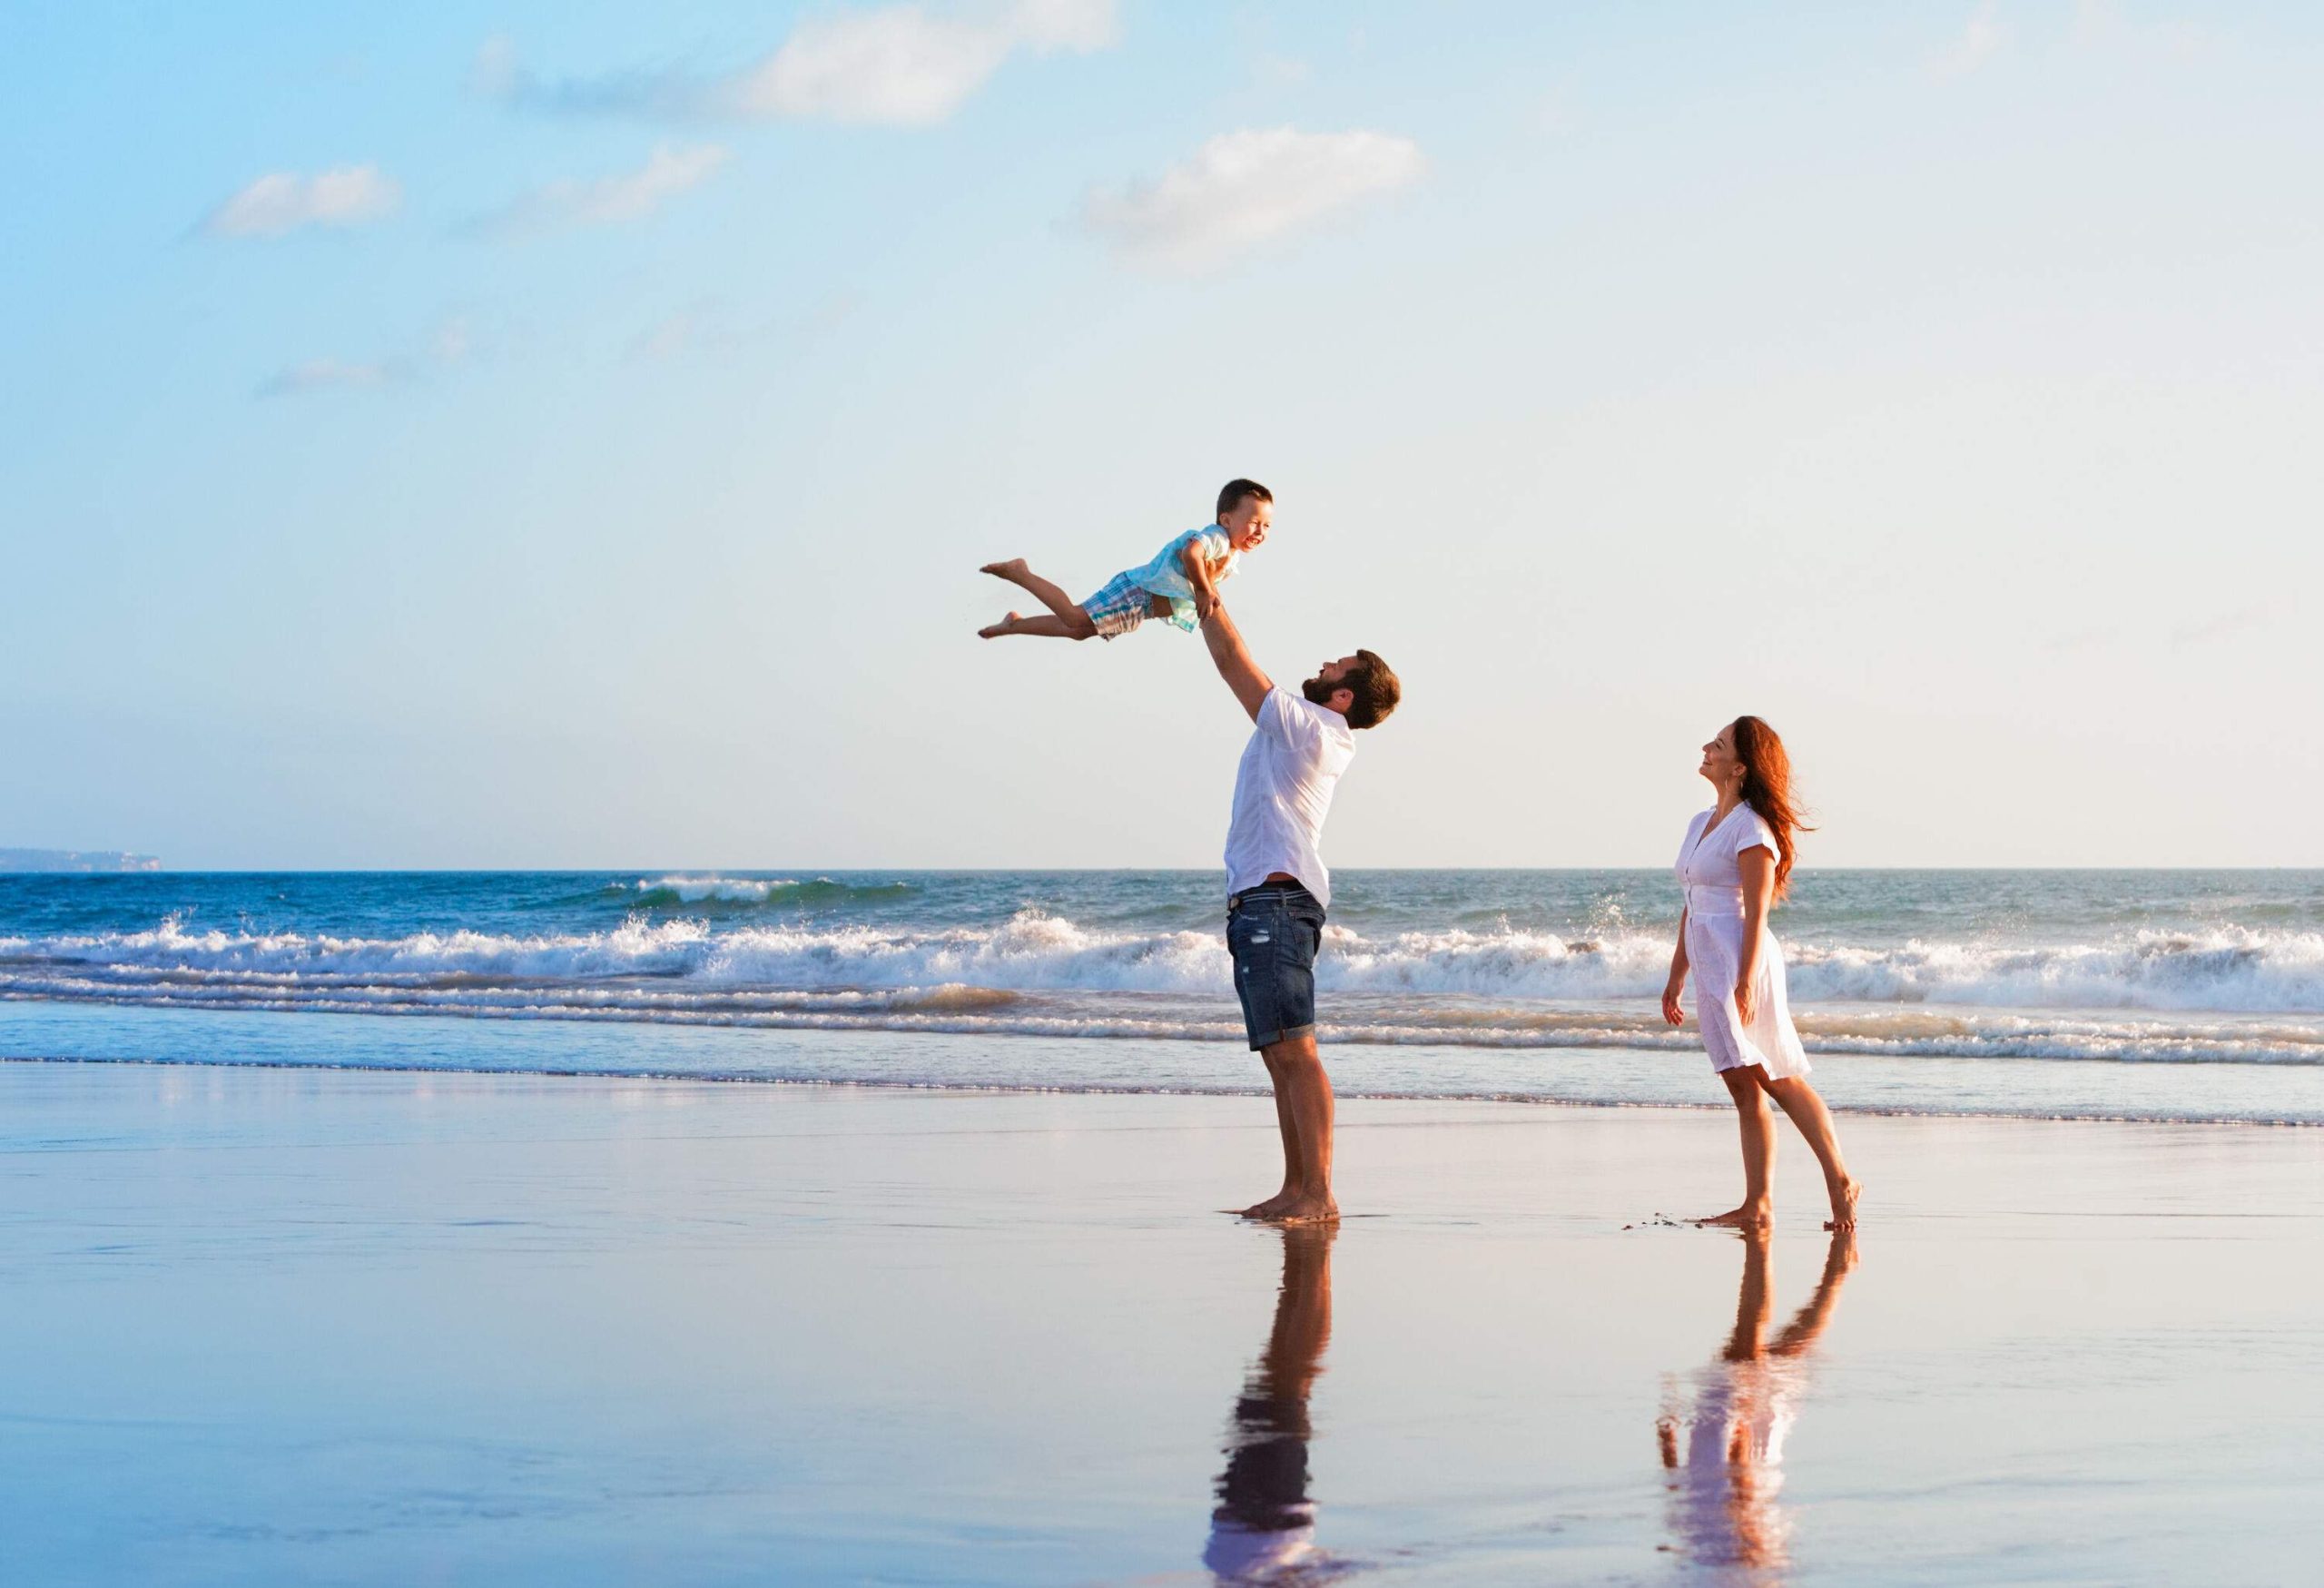 A man tossing a young boy in the air as a woman watches from behind them on the beach.